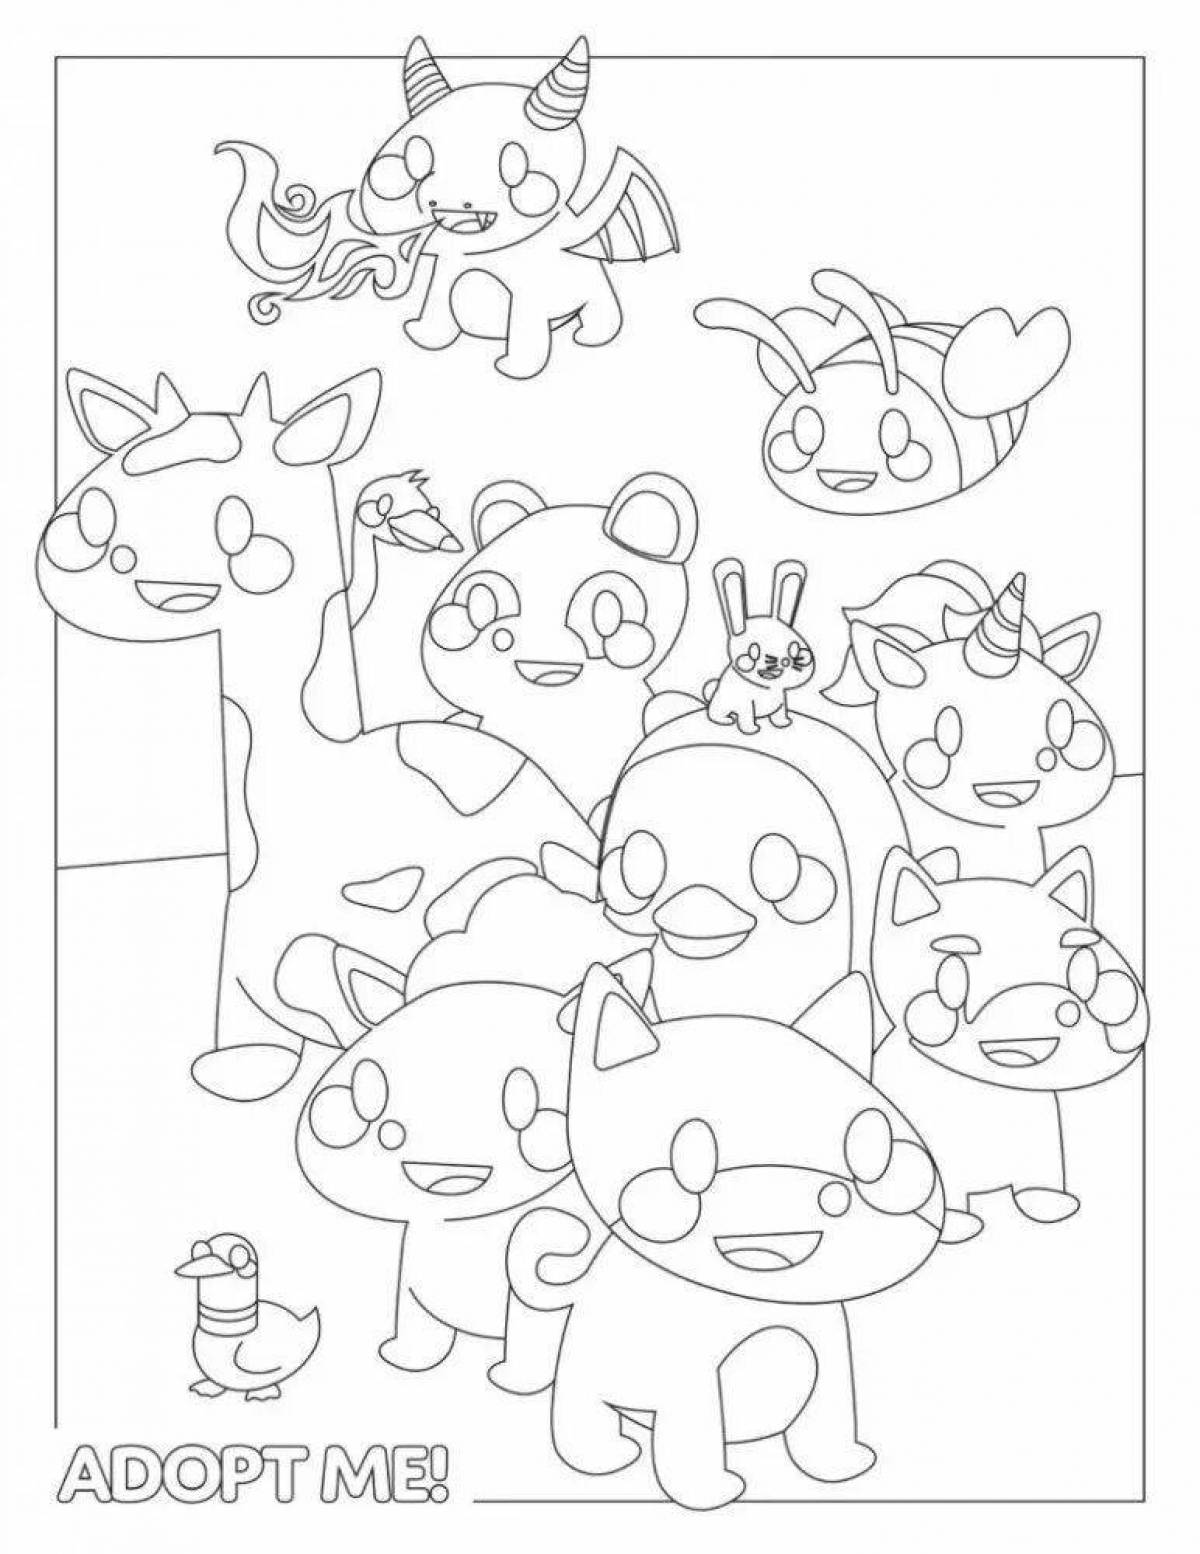 Playable pet coloring page from adopt me